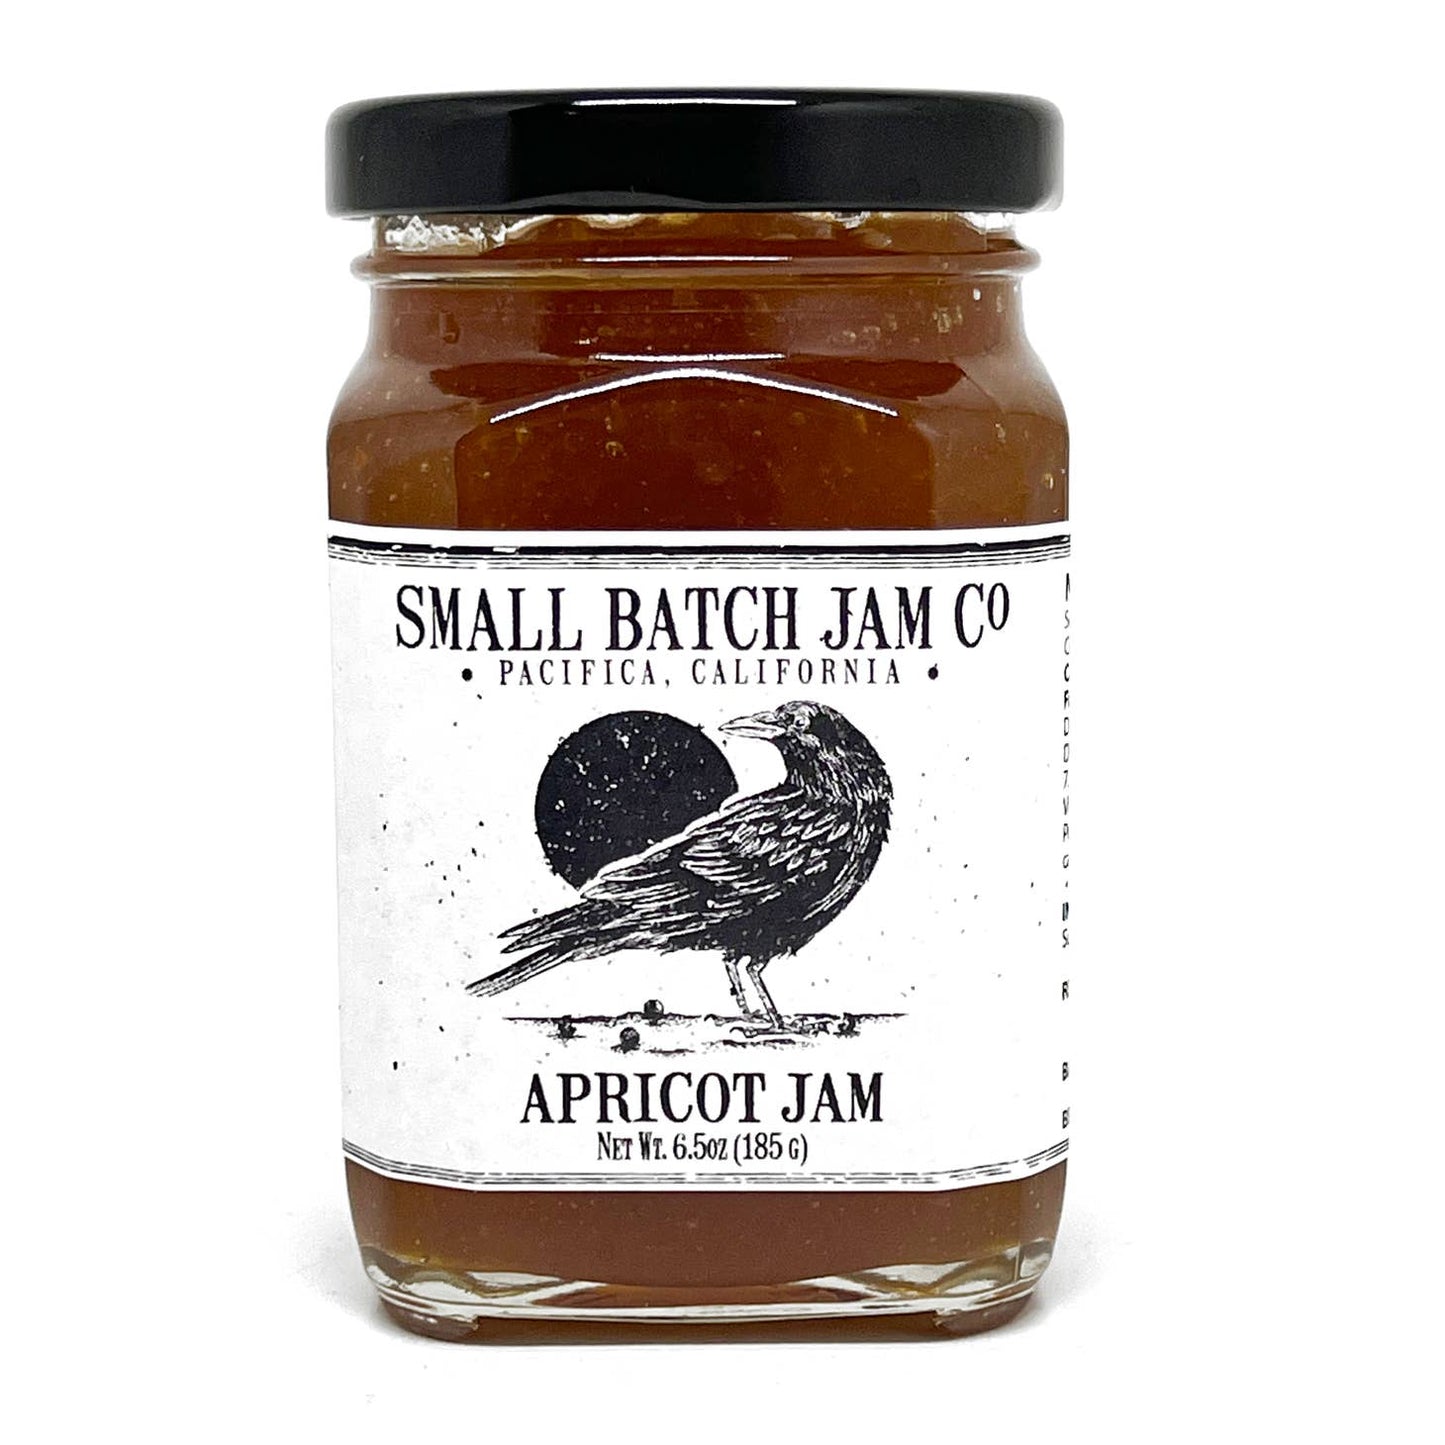 Jam: Small Batch Jam Co from Pacifica, California